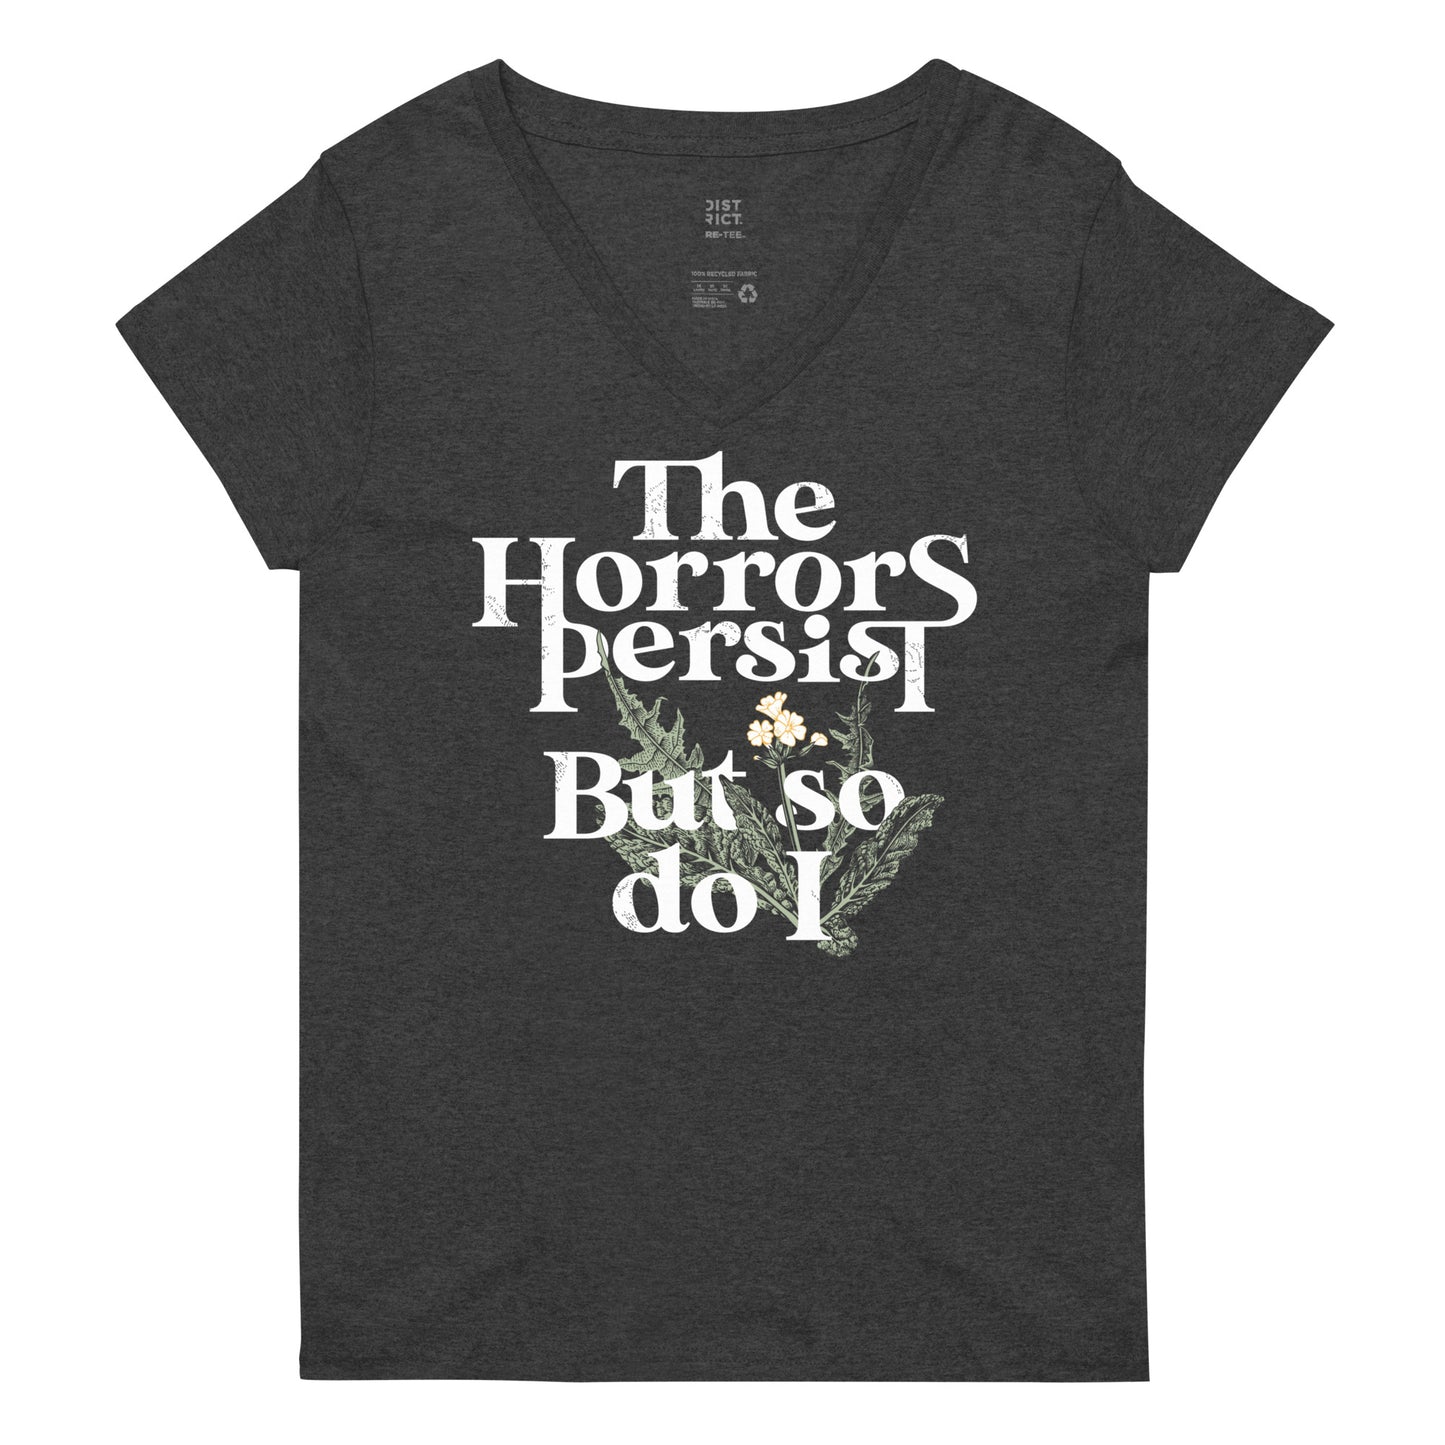 The Horrors Persist But So Do I Women's V-Neck Tee